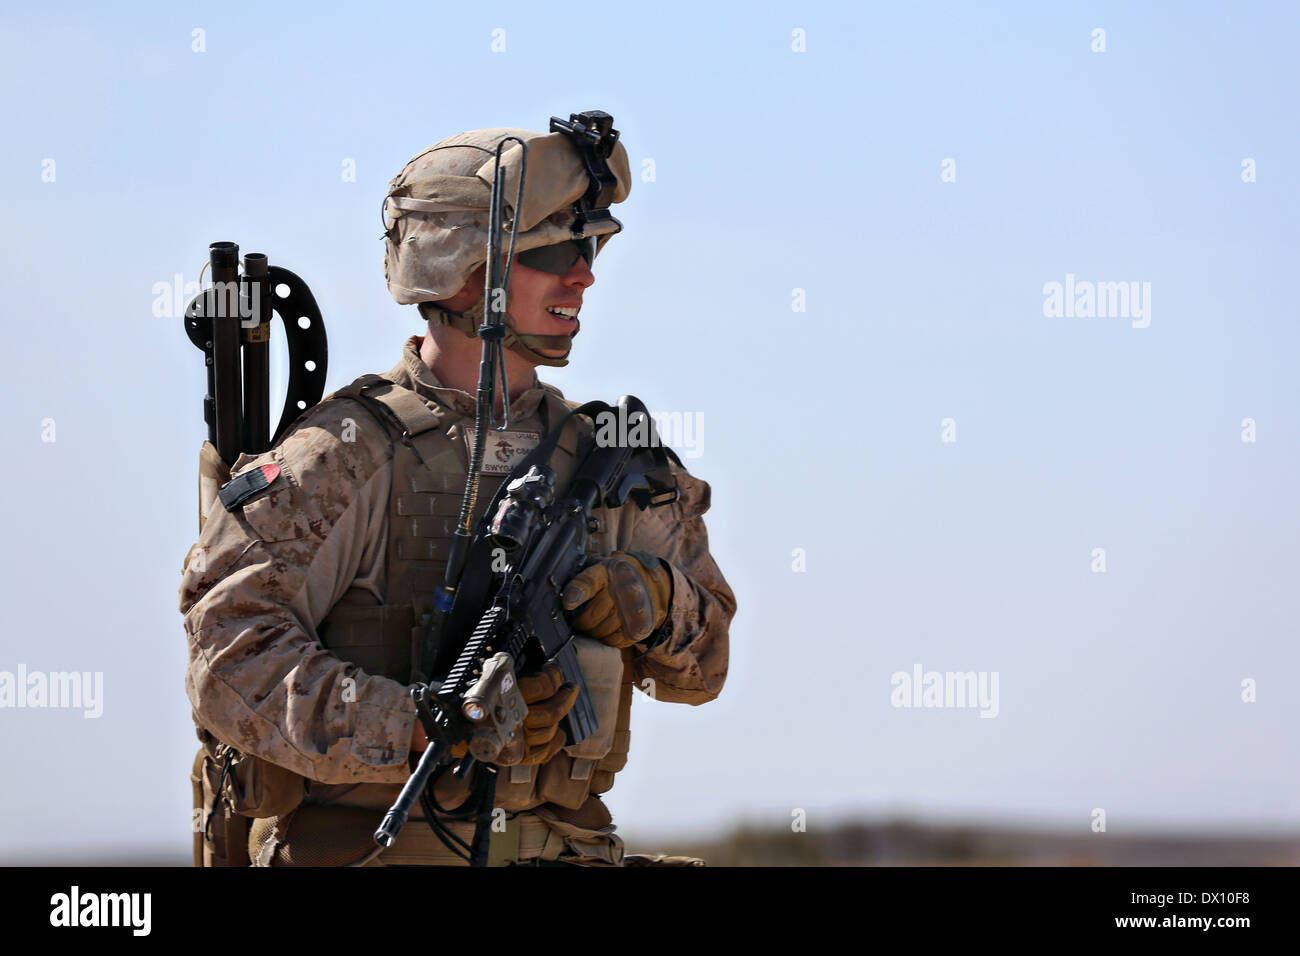 US Marine Corps Cpl. Nathon Swygart, a fire team leader with the 9th Marine Regiment, provides security during a patrol March 5, 2014 in Helmand province, Afghanistan. Stock Photo